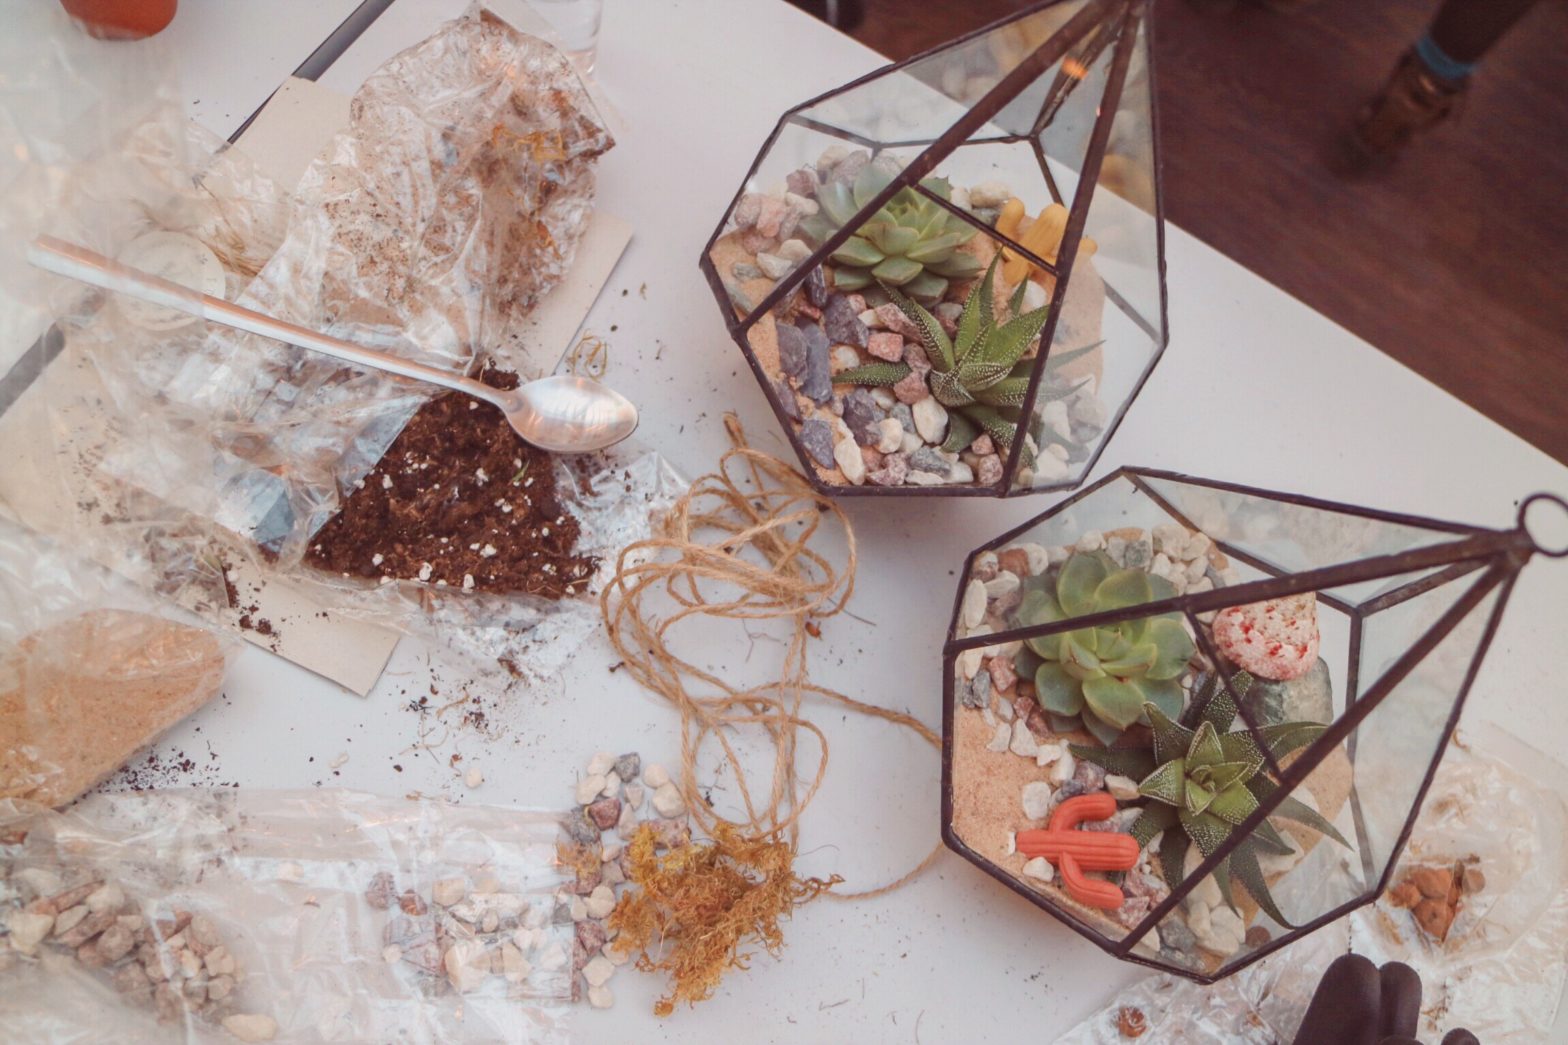 How to make a Terrarium - image of two terrariums made up with remnants of soil and pebbles around the table